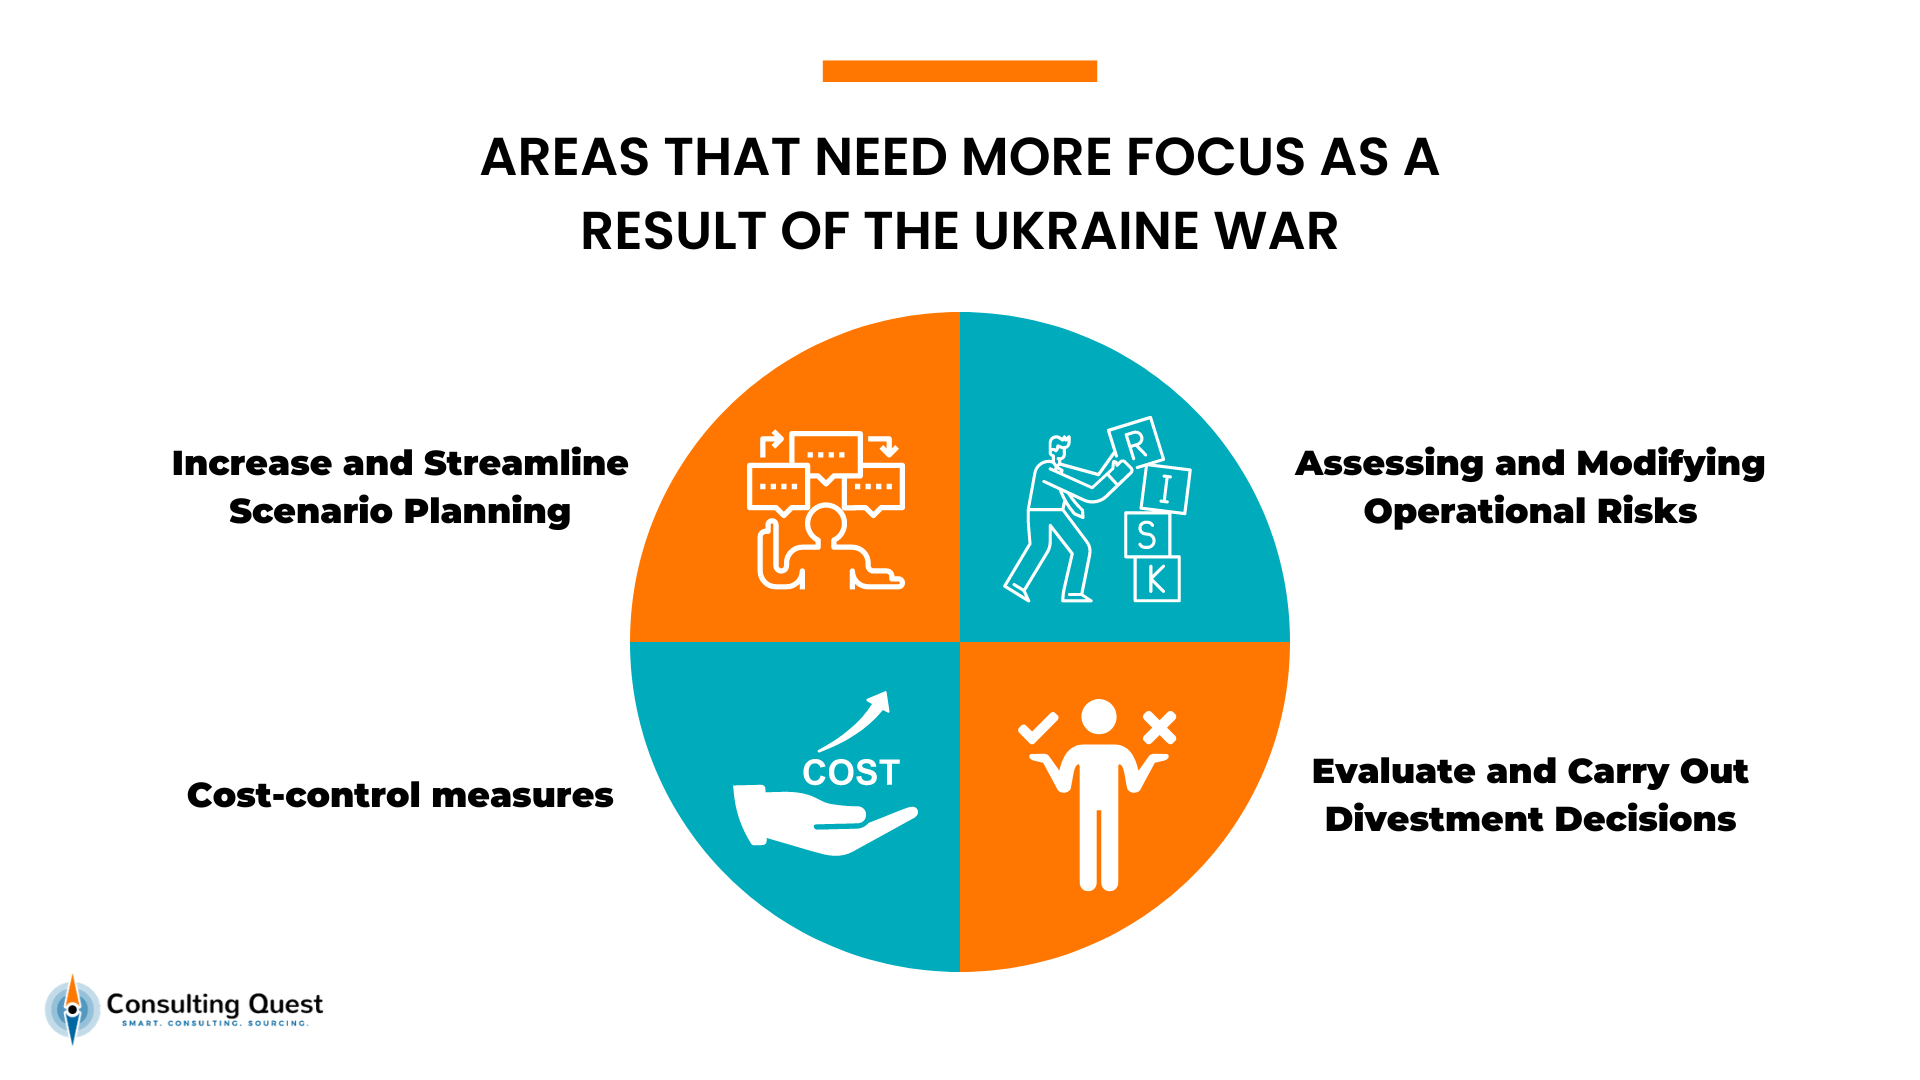 Areas that need more focus due to the war in Ukraine